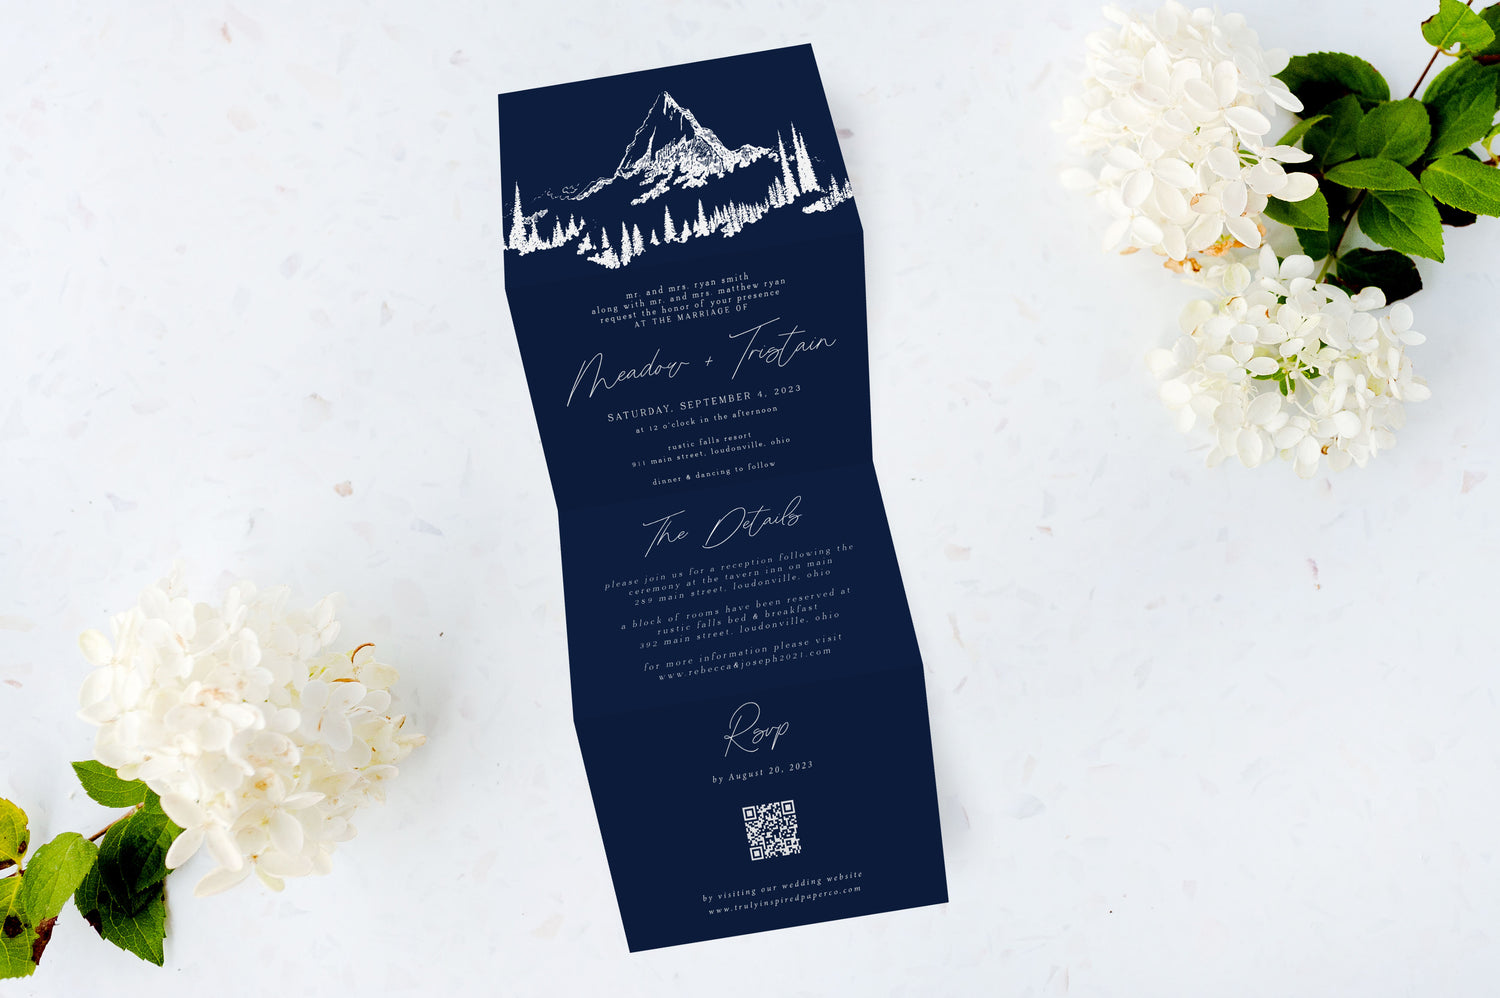 White Ink Tri Fold Wedding Invitations - The Meadow Design - Navy